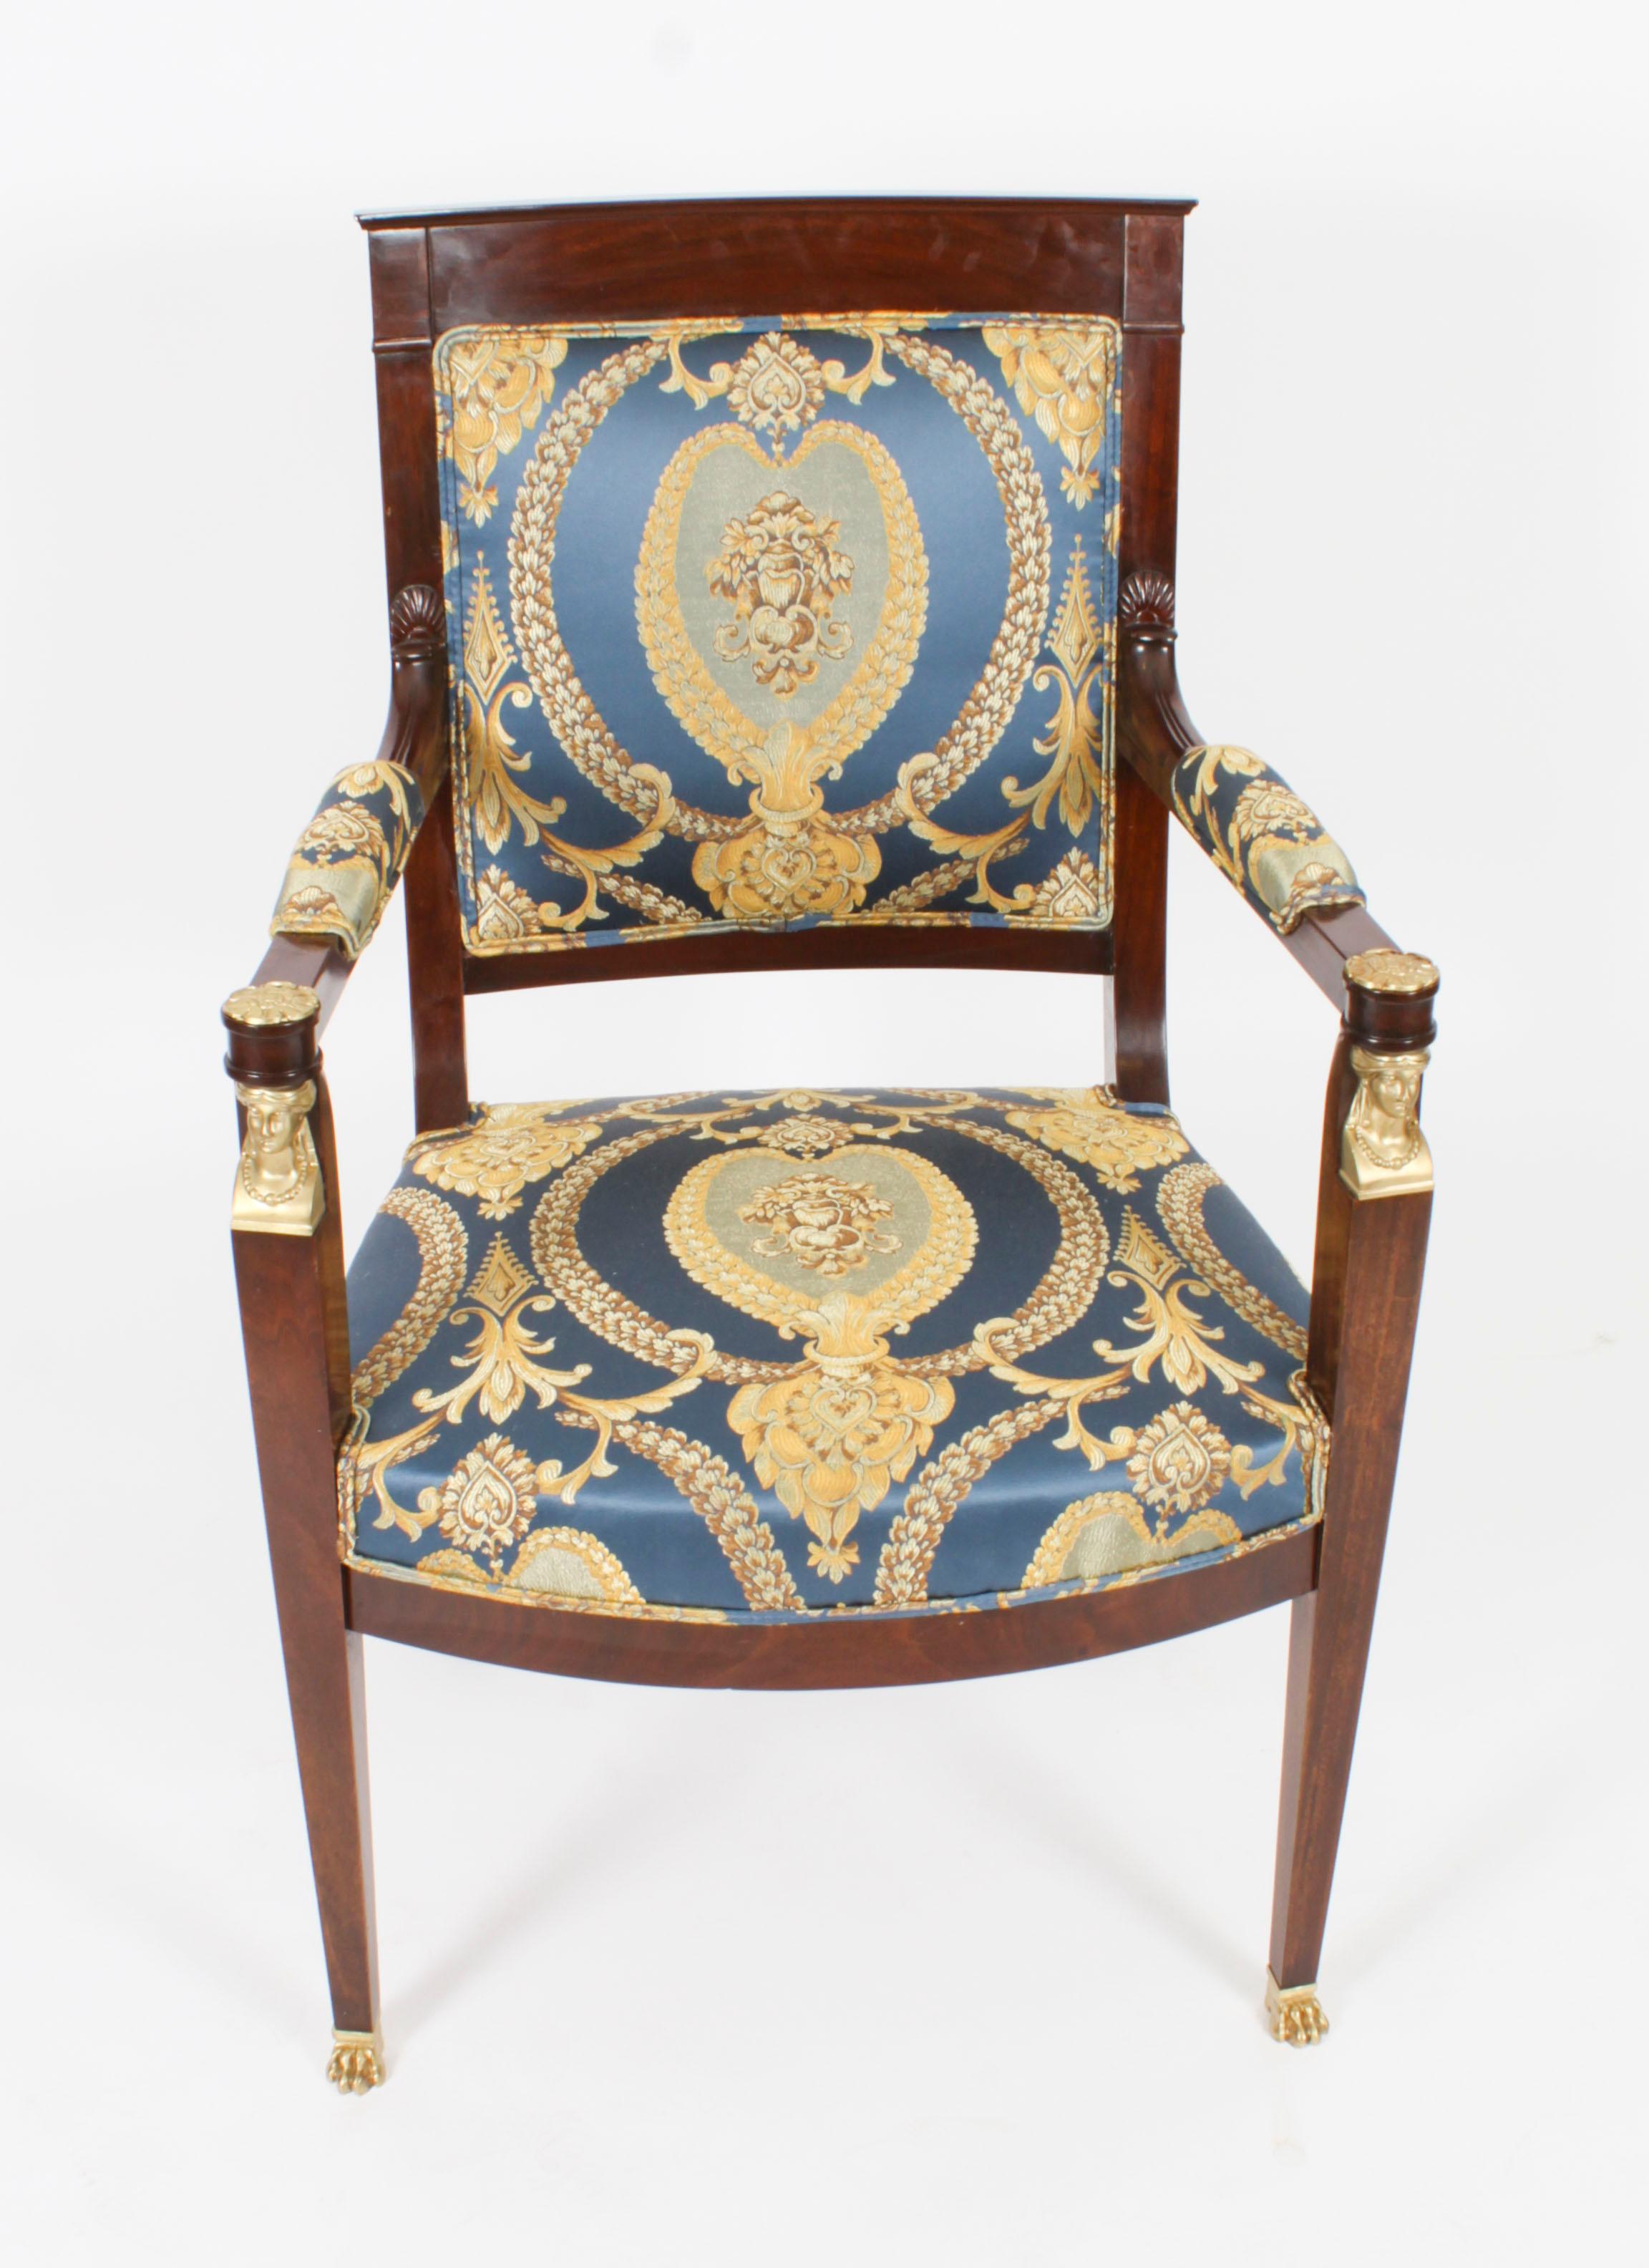 This is a fantastic and highly decorative antique pair of French gilt bronze mounted Empire Revival fauteuil armchairs,  circa 1870 in date.

They have been crafted from fabulous solid mahogany and are smothered in fabulous high quality ormolu